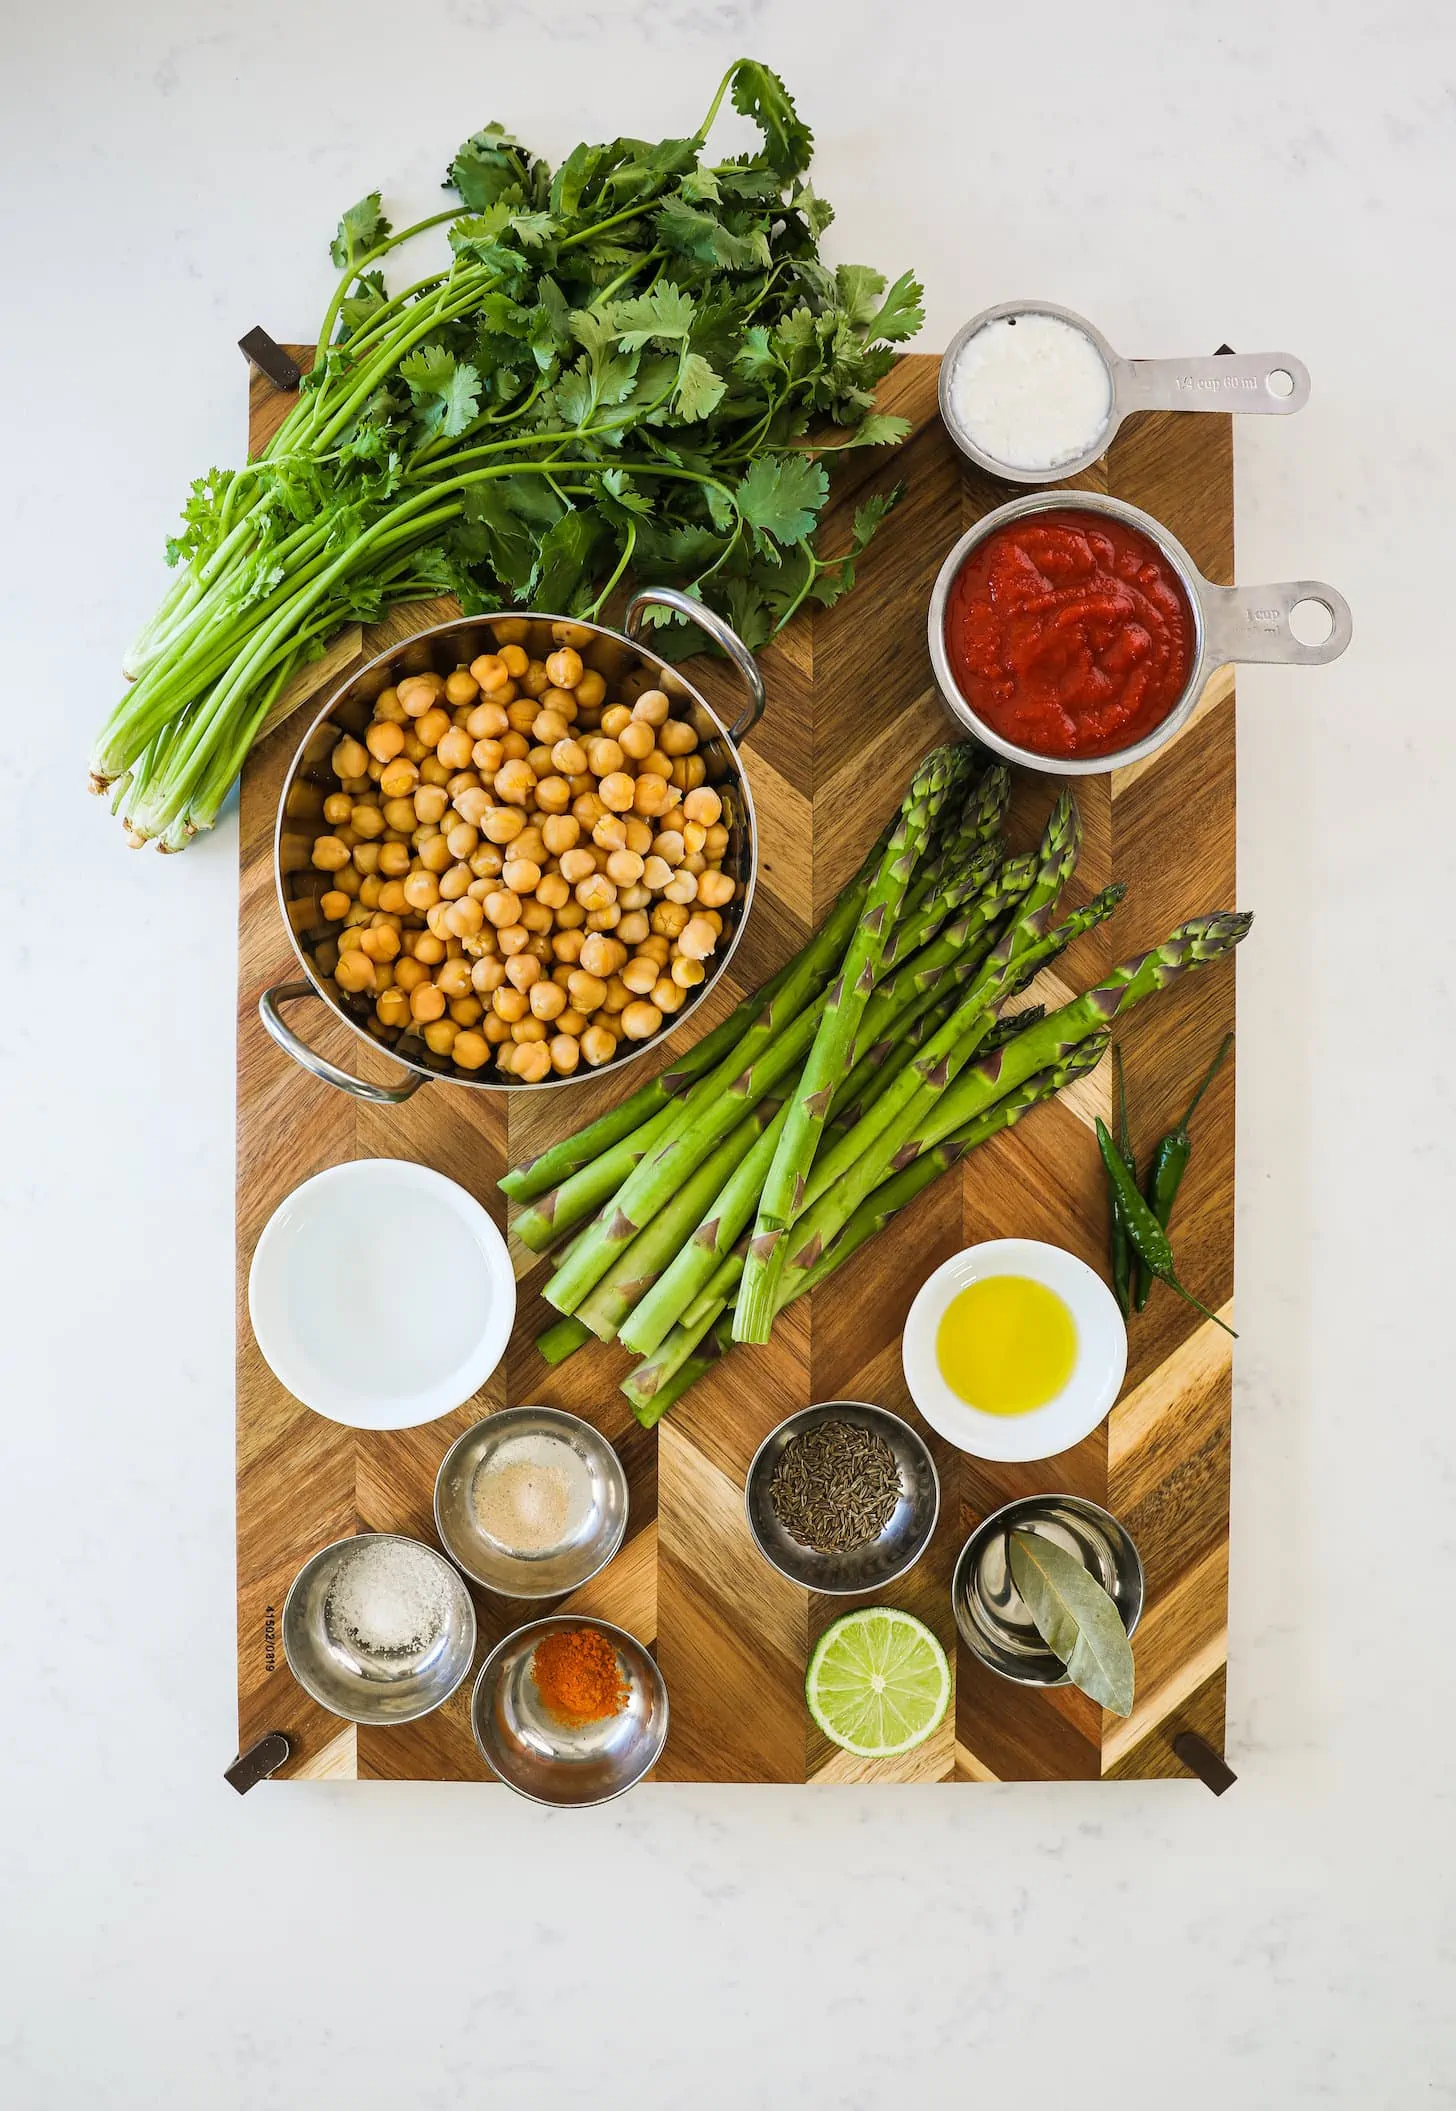 a wooden board staged with food ingredients like asparagus, a wok of chickpeas, spices, herbs and chillies.